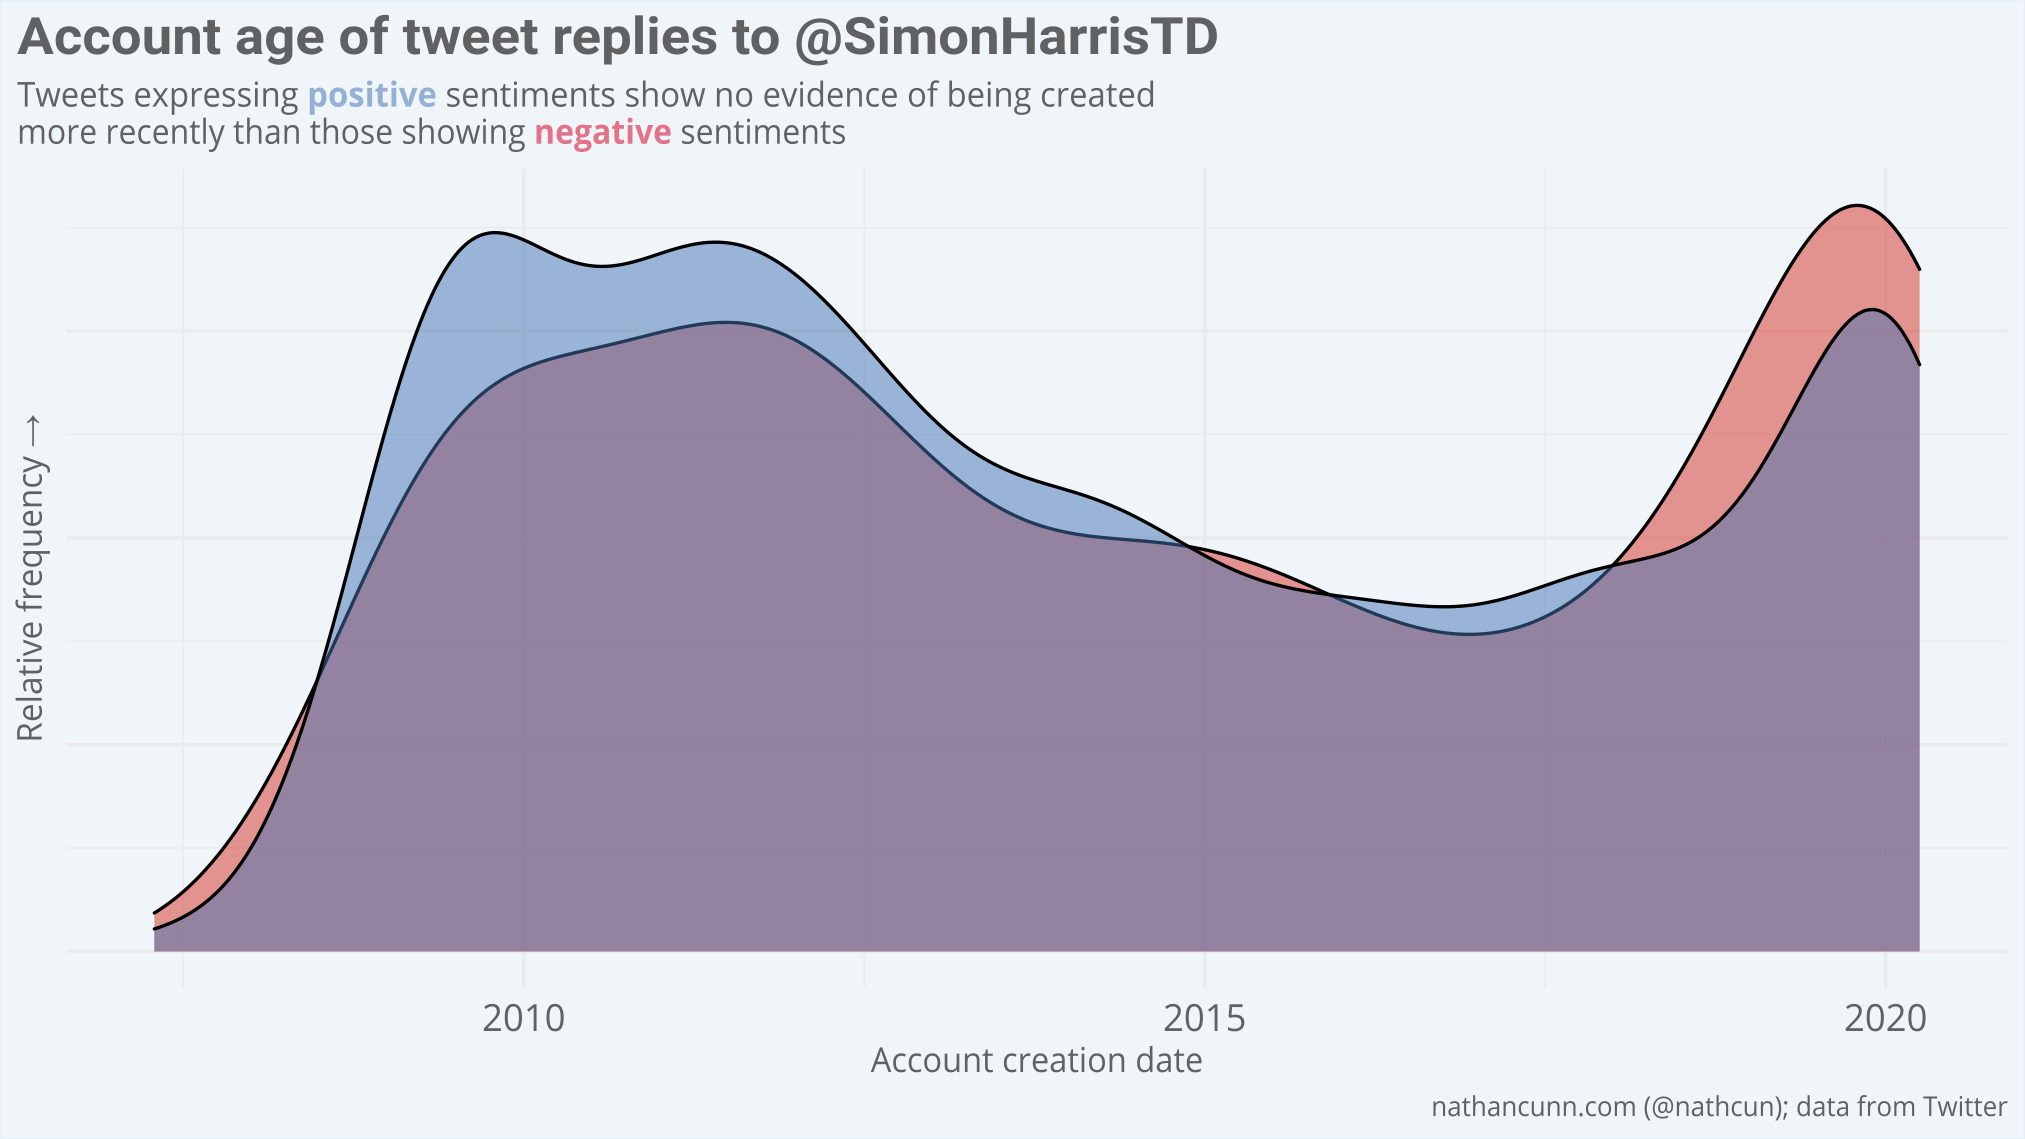 A density plot showing the age make-up of accounts responding to @SimonHarrisTD broken down by the sentiment expressed in their tweets. There is no evidence that those positing negative messages were created more recently.